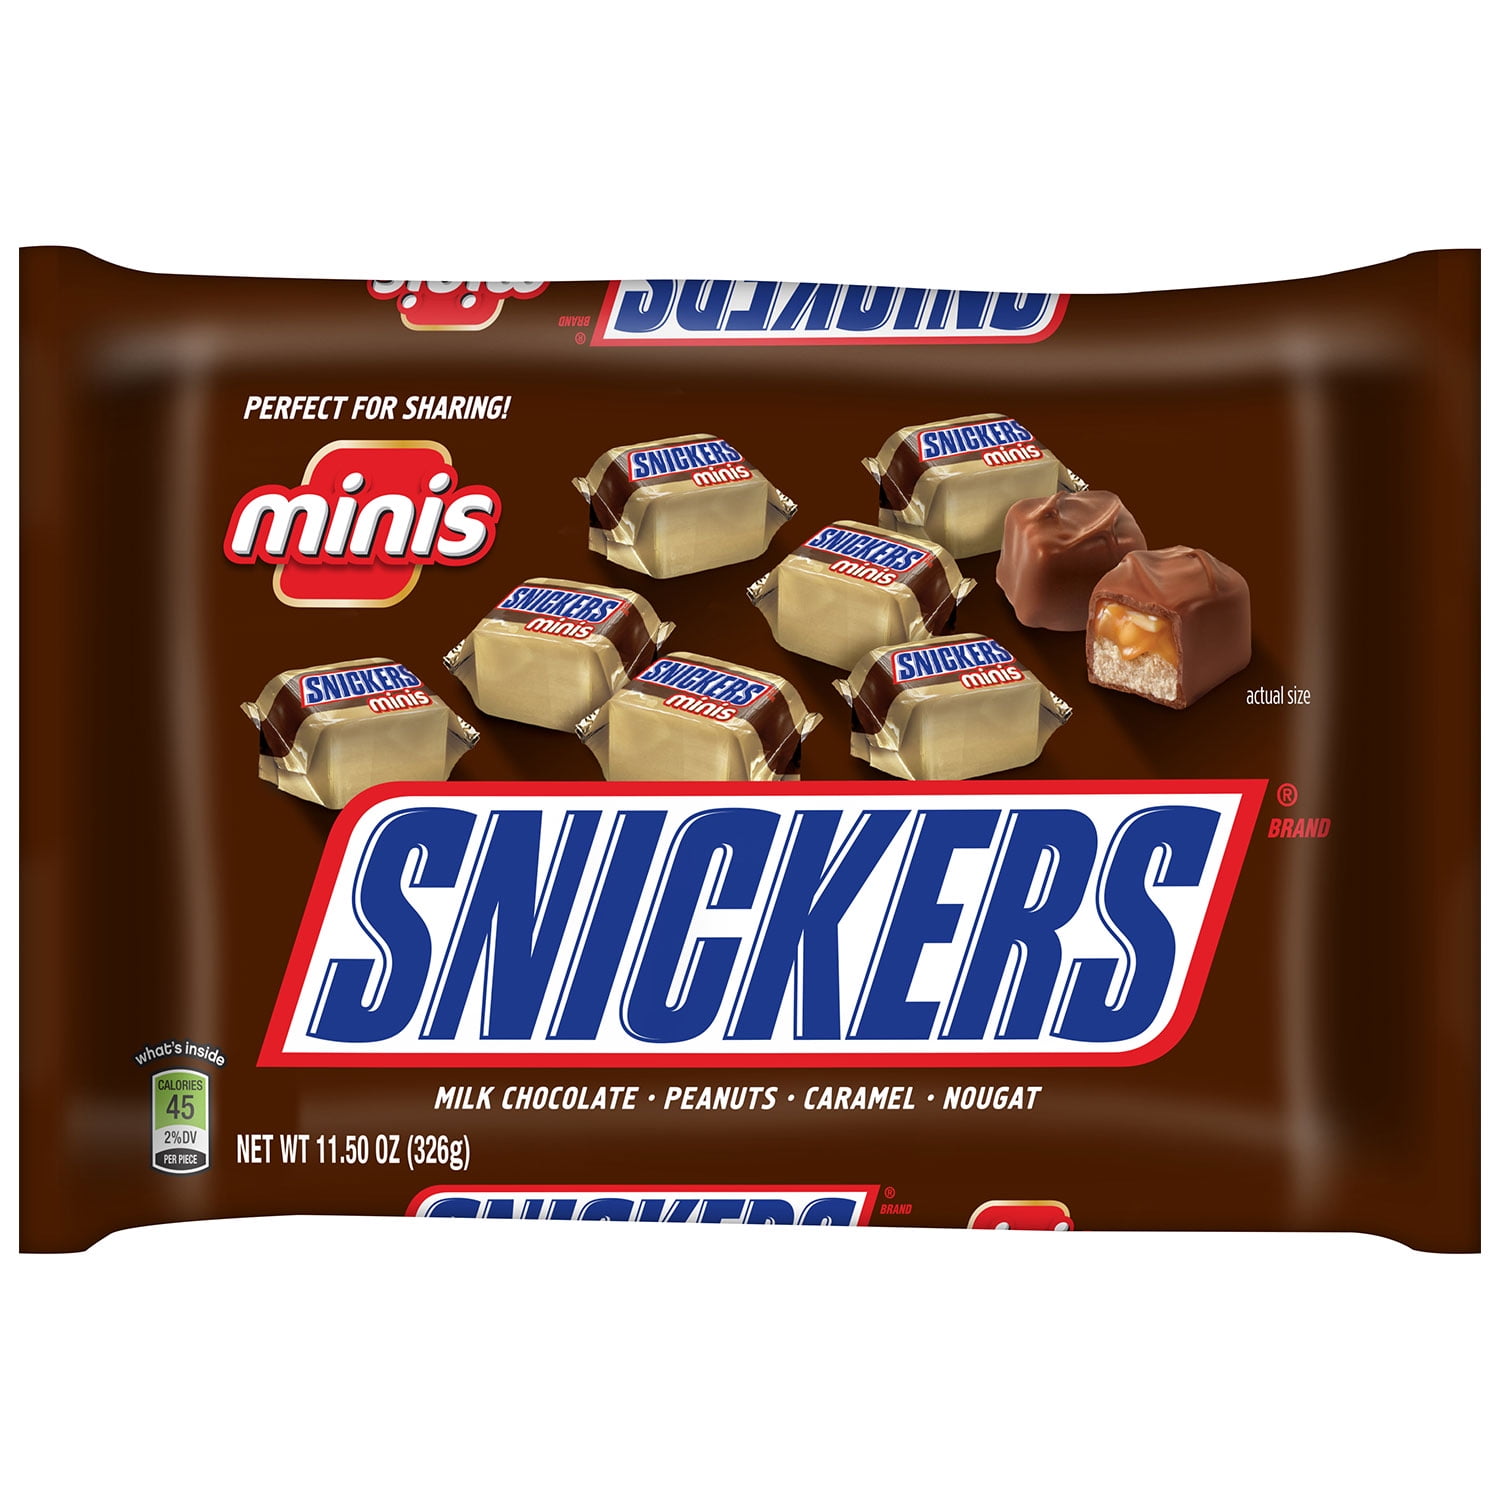 Snickers Minis Chocolate Bar Candy Pack 2.48 oz